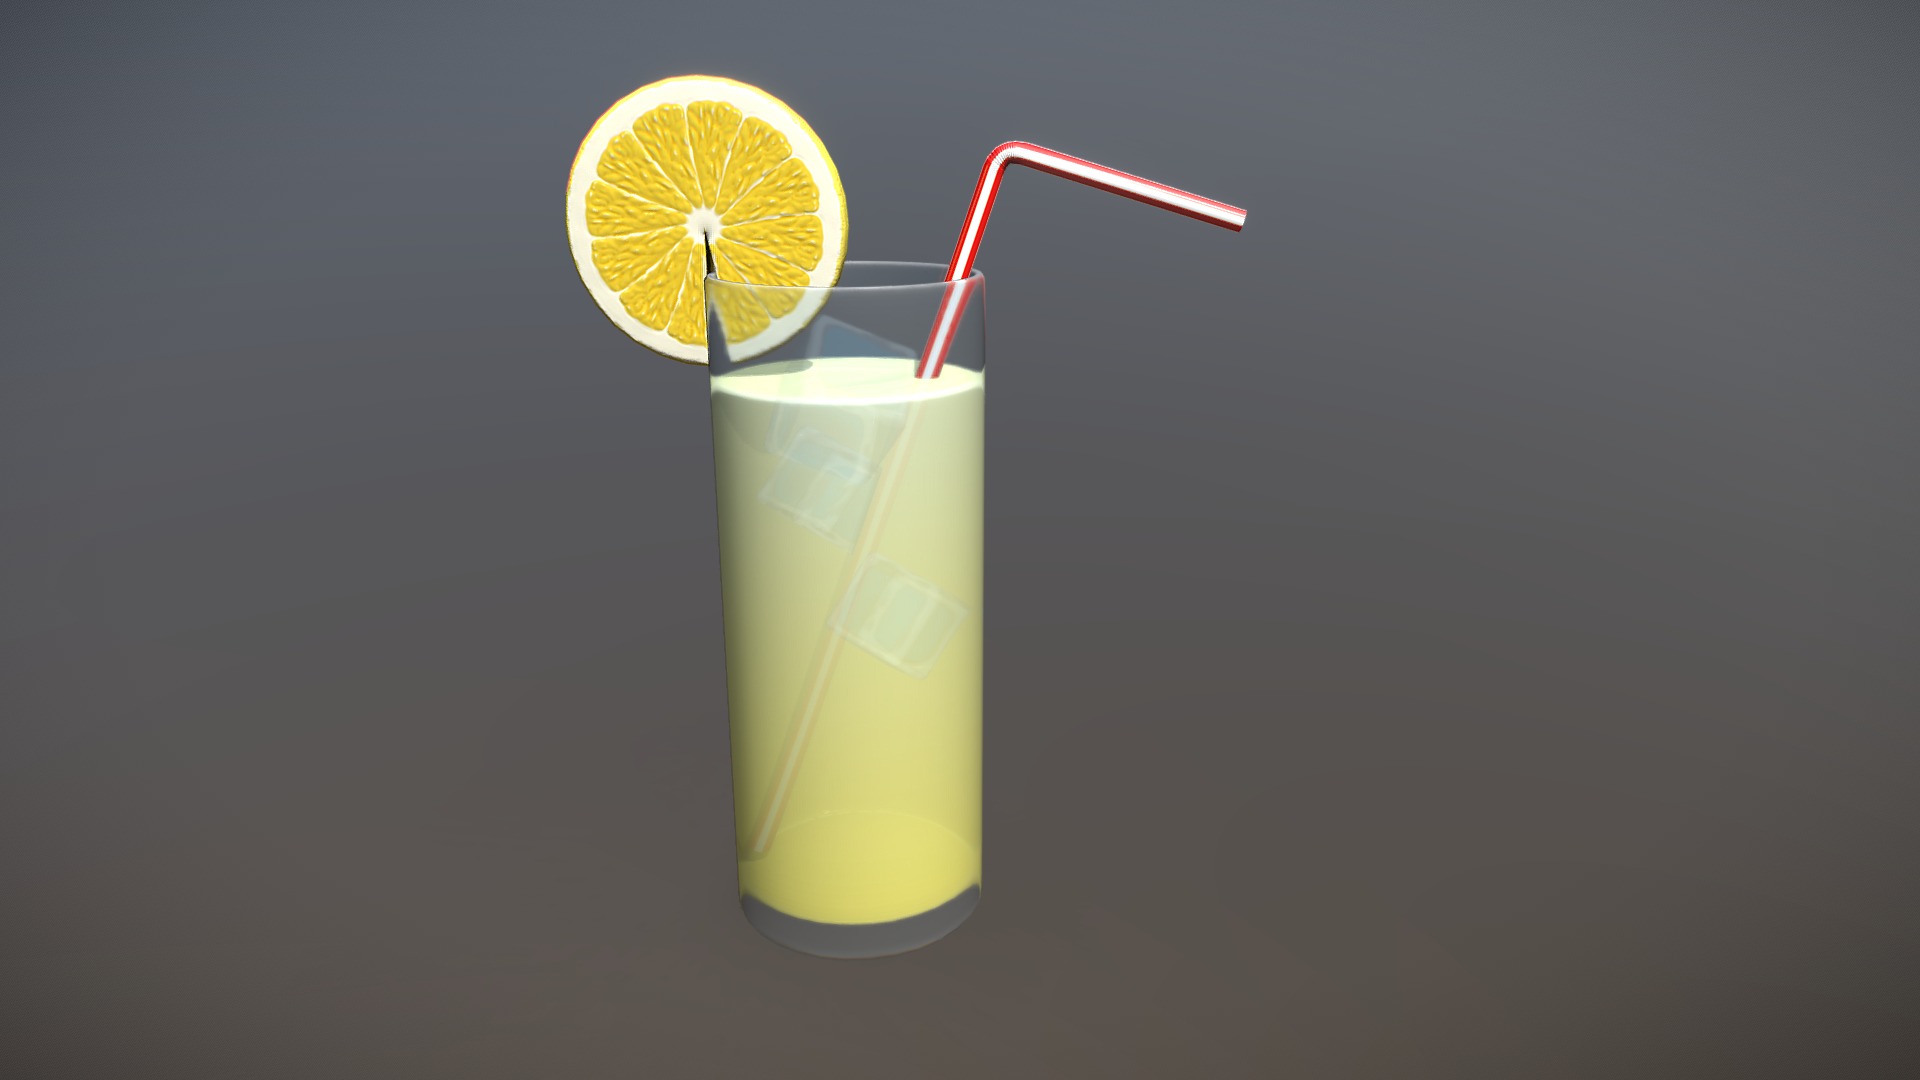 3D model Lemonade - This is a 3D model of the Lemonade. The 3D model is about a glass with a drink and a lemon slice on top.